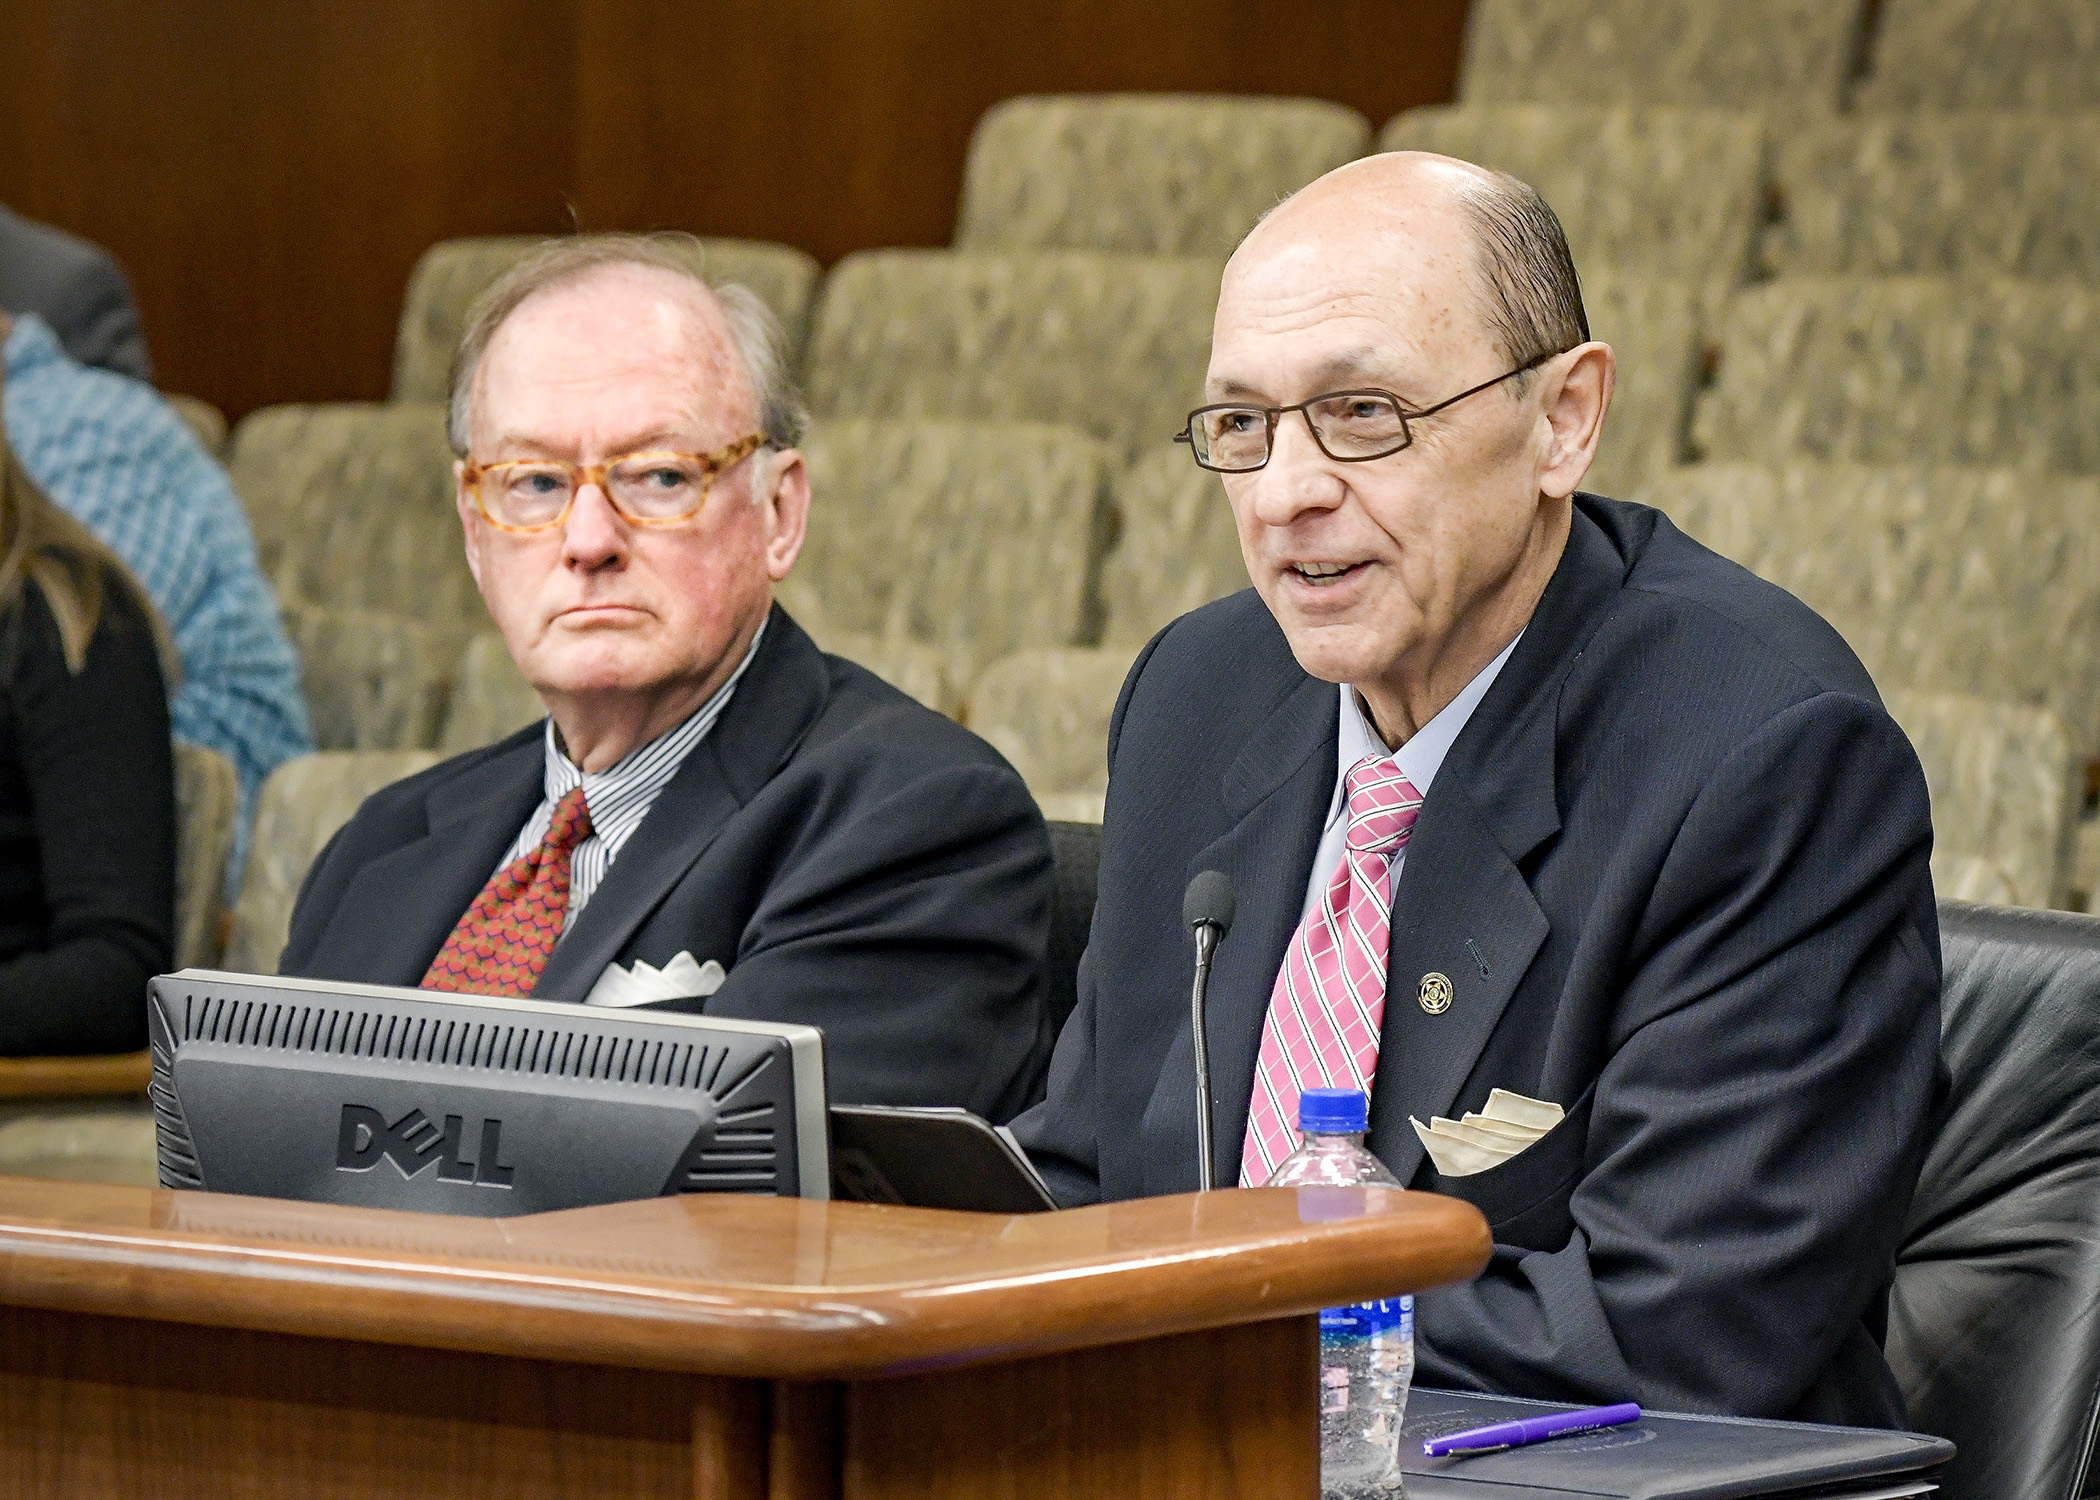 Mike Vekich, right, chair of the Minnesota Sports Facilities Authority, and Rick Evans, the authority’s executive director, testify Nov. 1 before the House State Government Finance Committee about security issues at U.S. Bank Stadium. Photo by Andrew VonBank